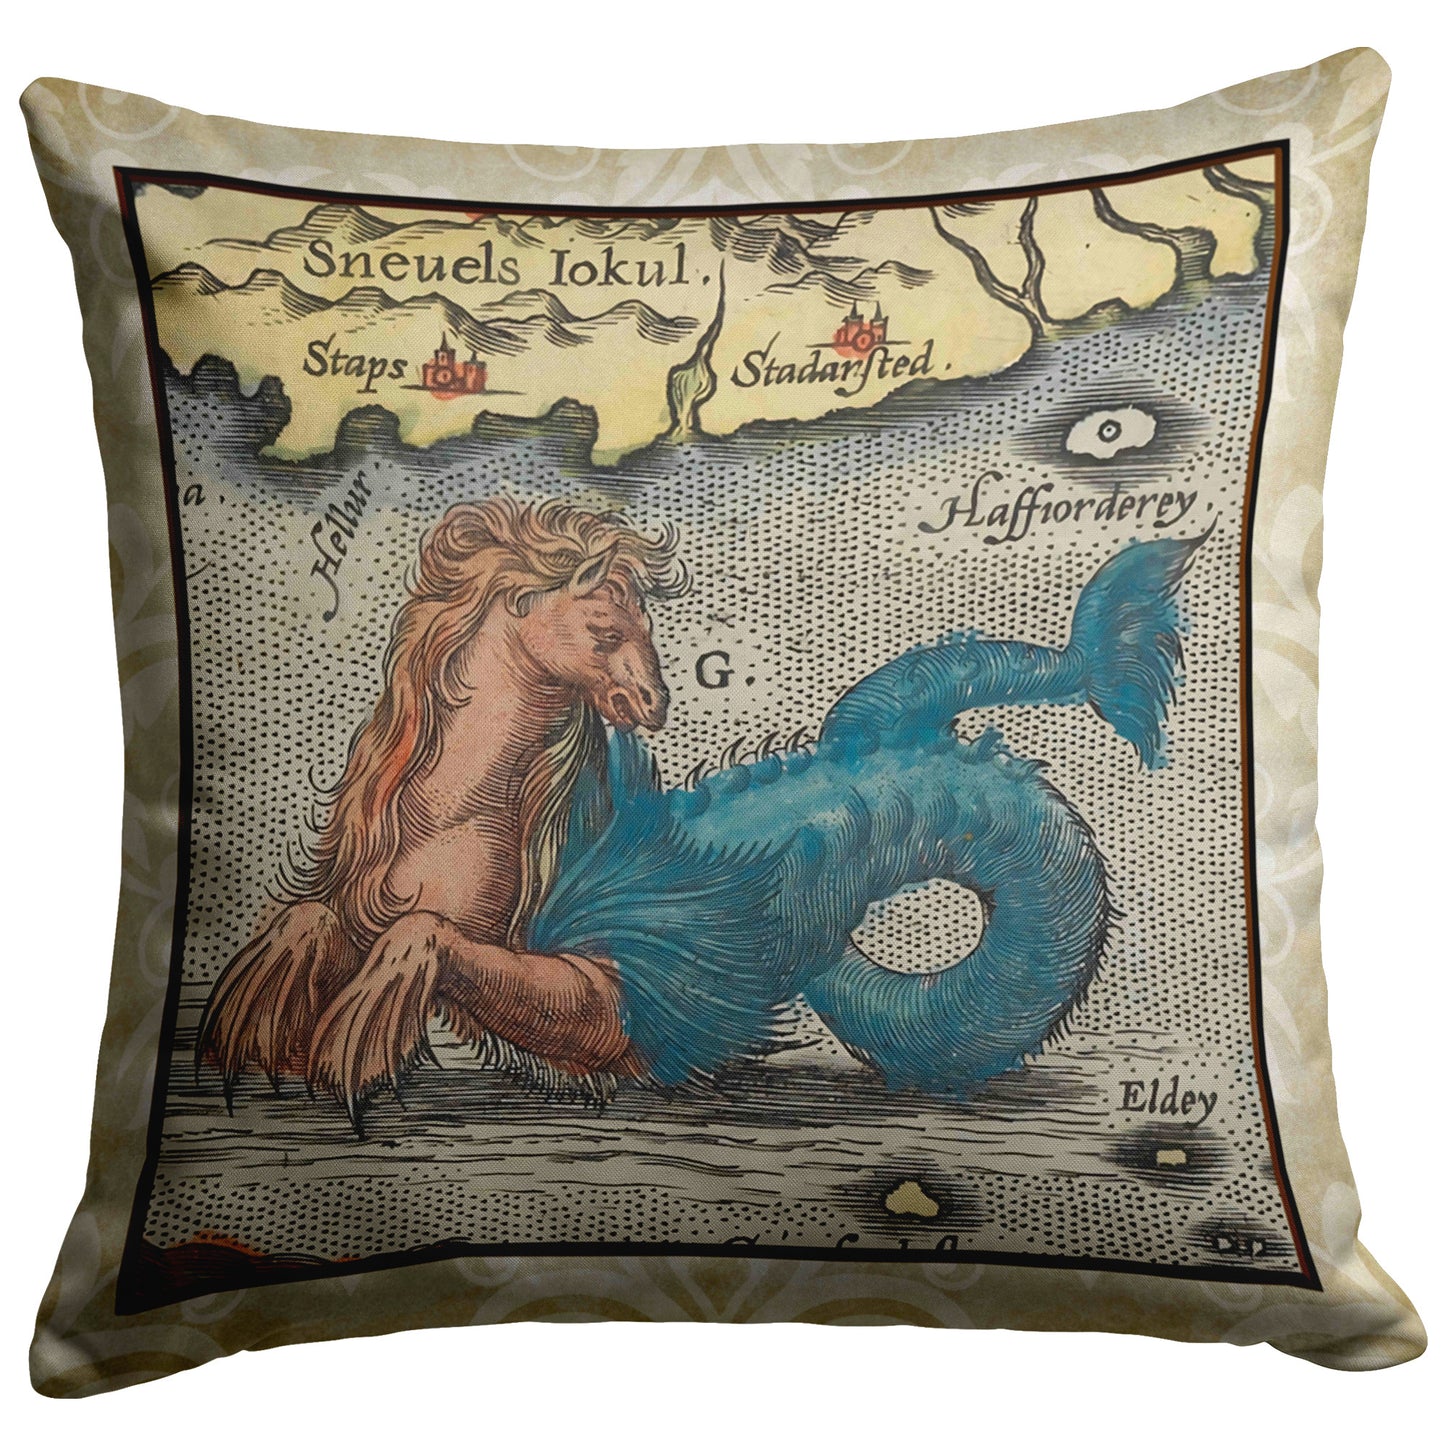 Sea Monster Throw Pillow - Hippocampus Color